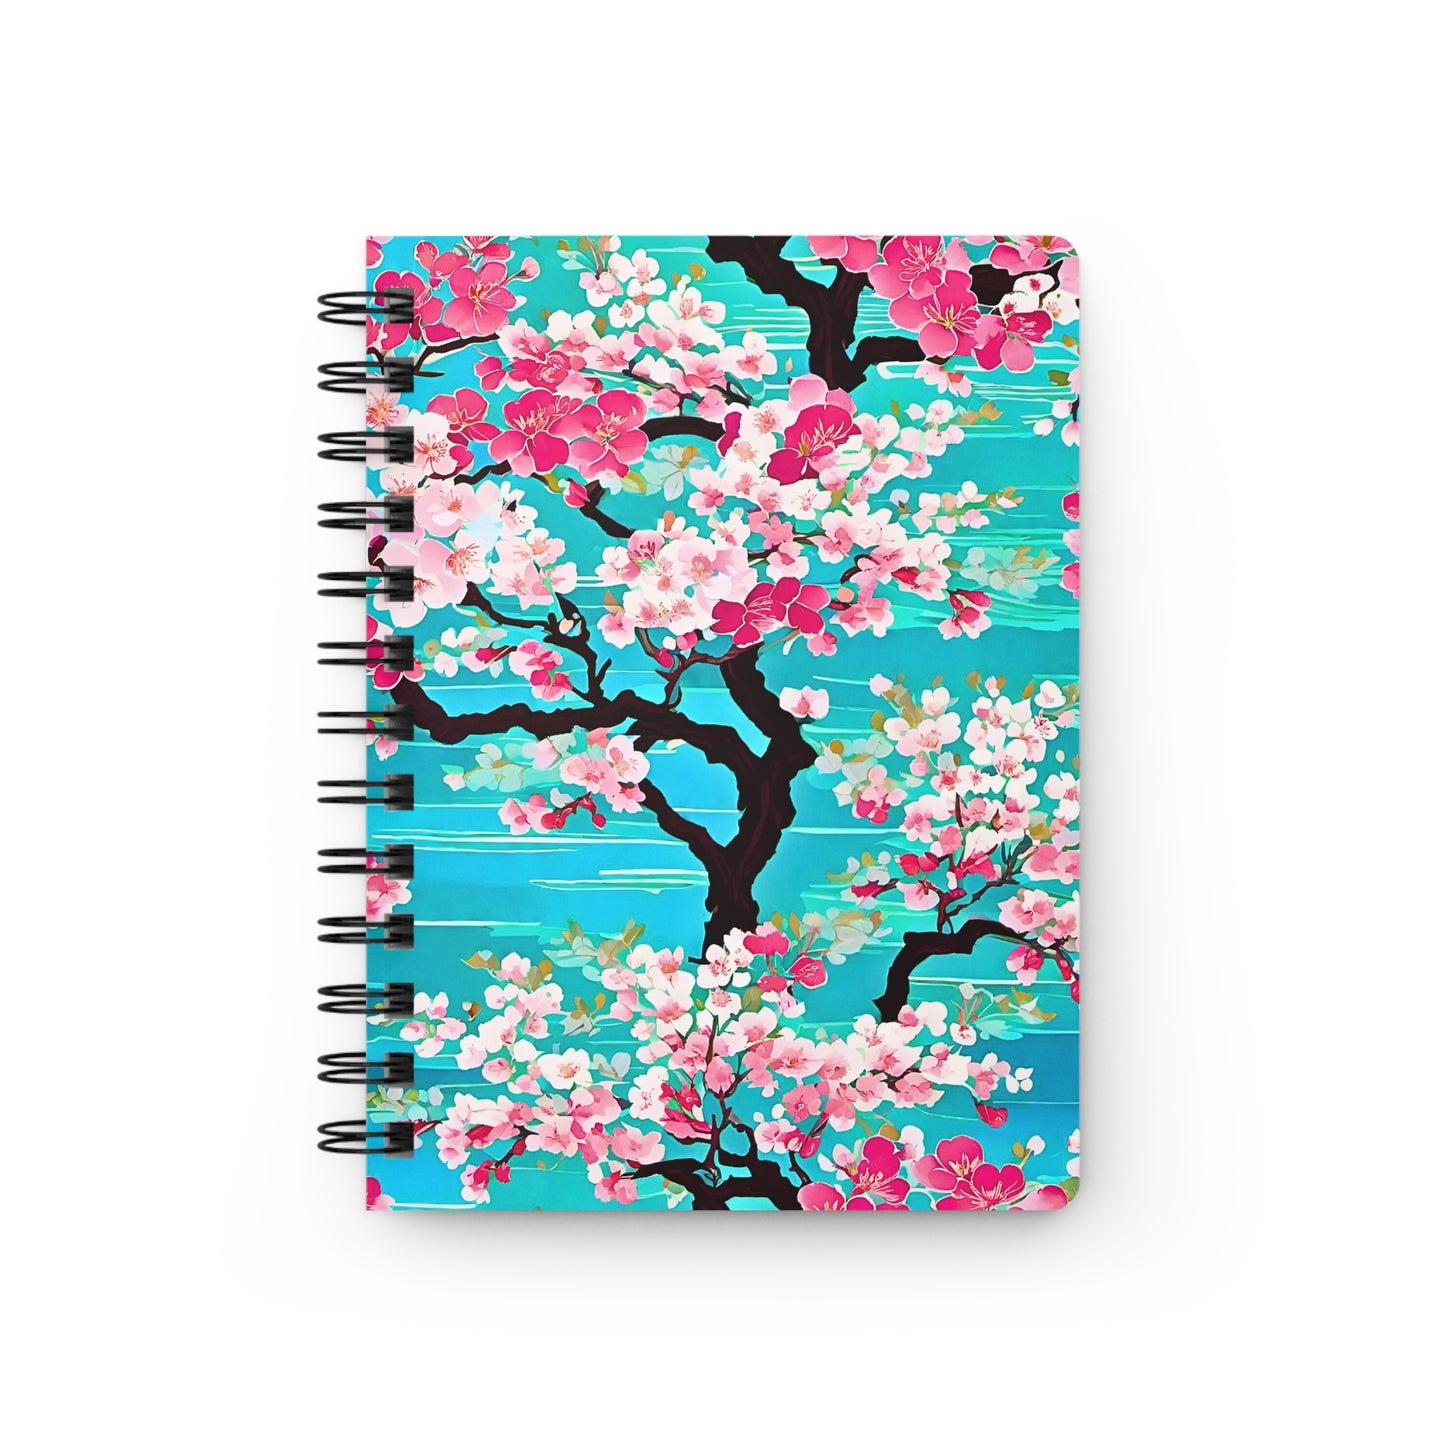 Turquoise Cherry Blossoms Japanese Kyoto Floral Writing Travel Journal Spiral Bound Journal